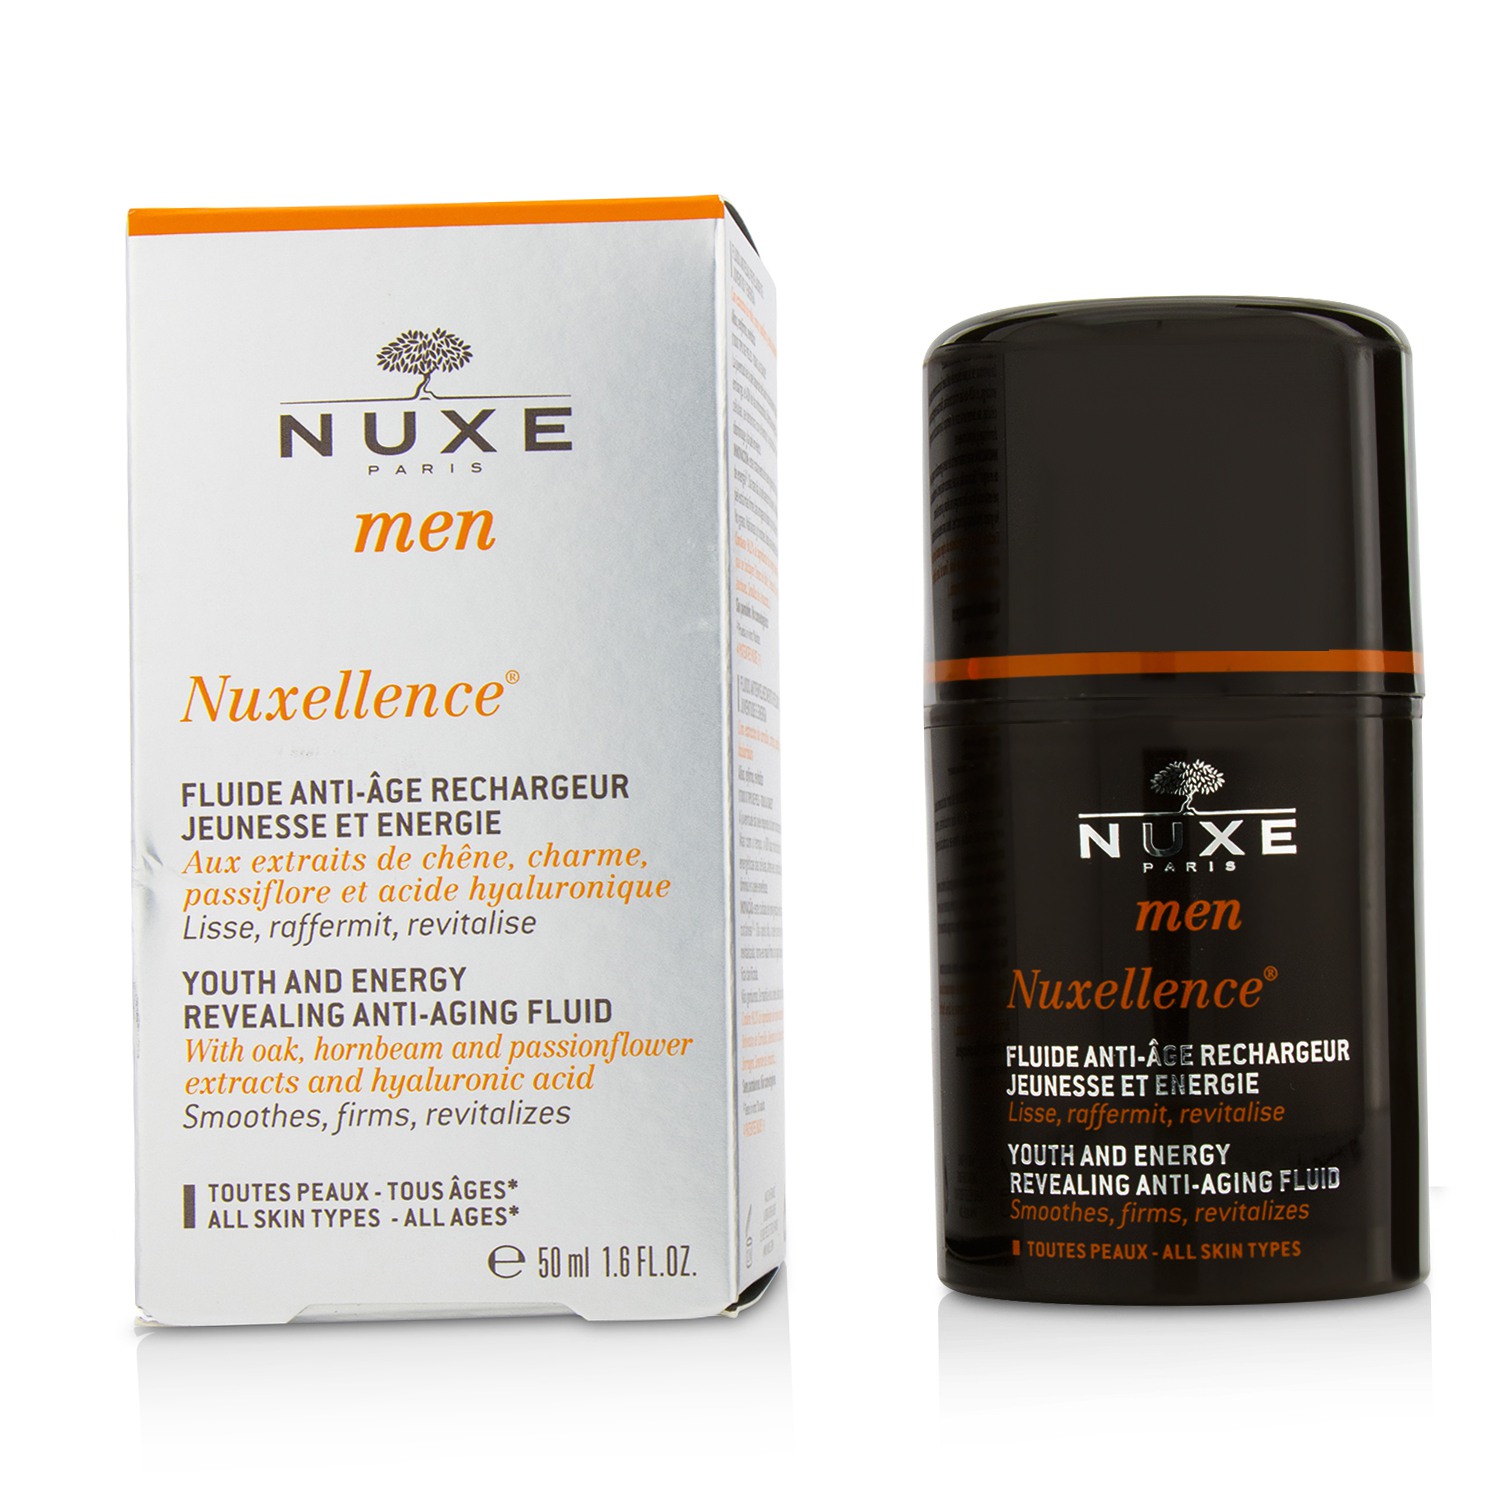 Men Nuxellence Youth And Energy Revealing Anti-Aging Fluid Nuxe Image